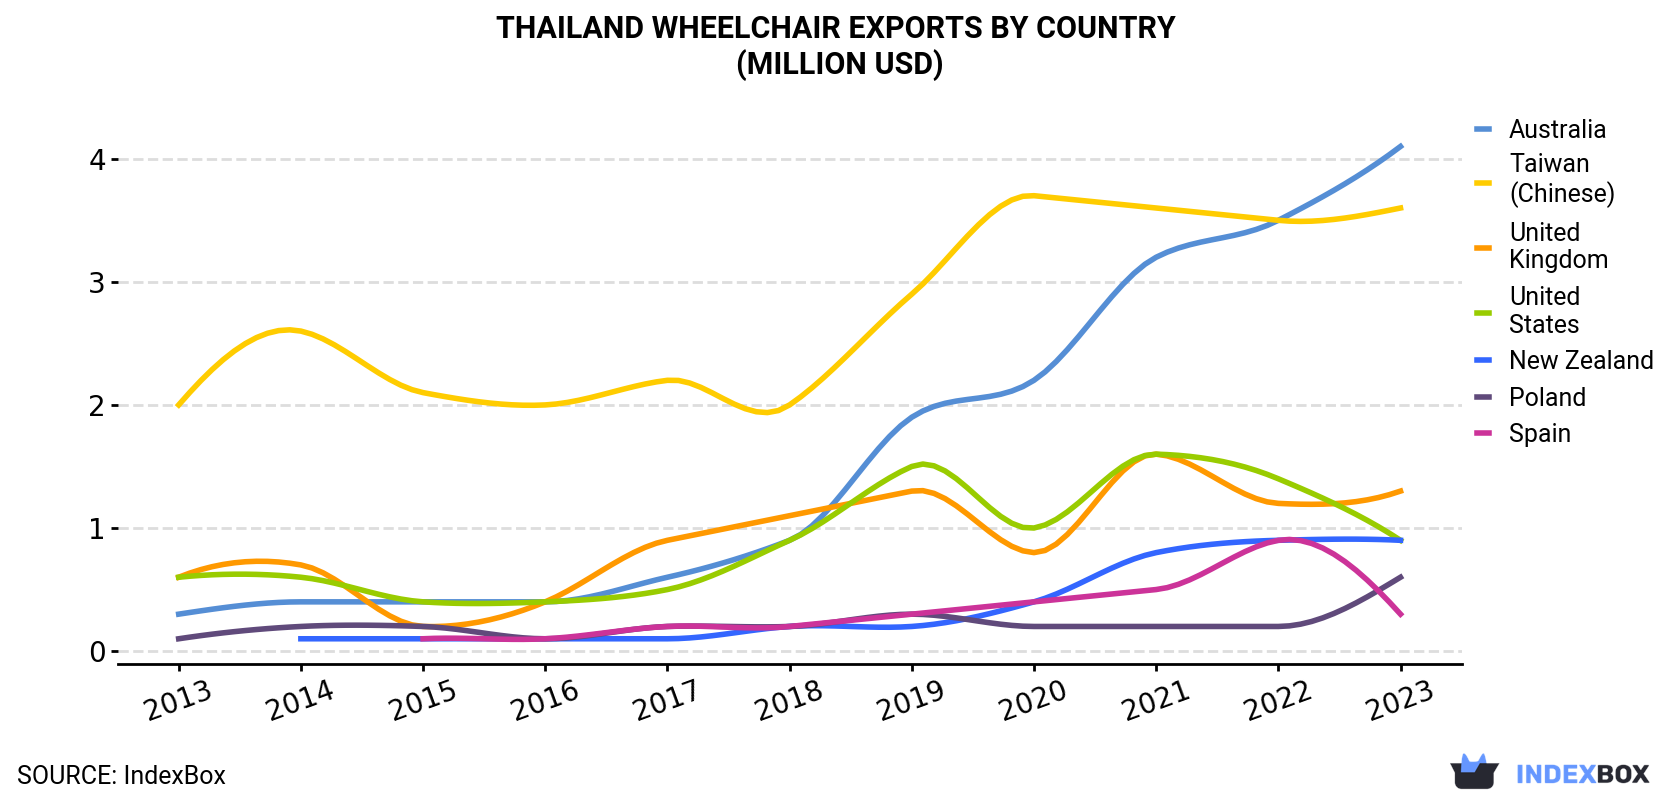 Thailand Wheelchair Exports By Country (Million USD)